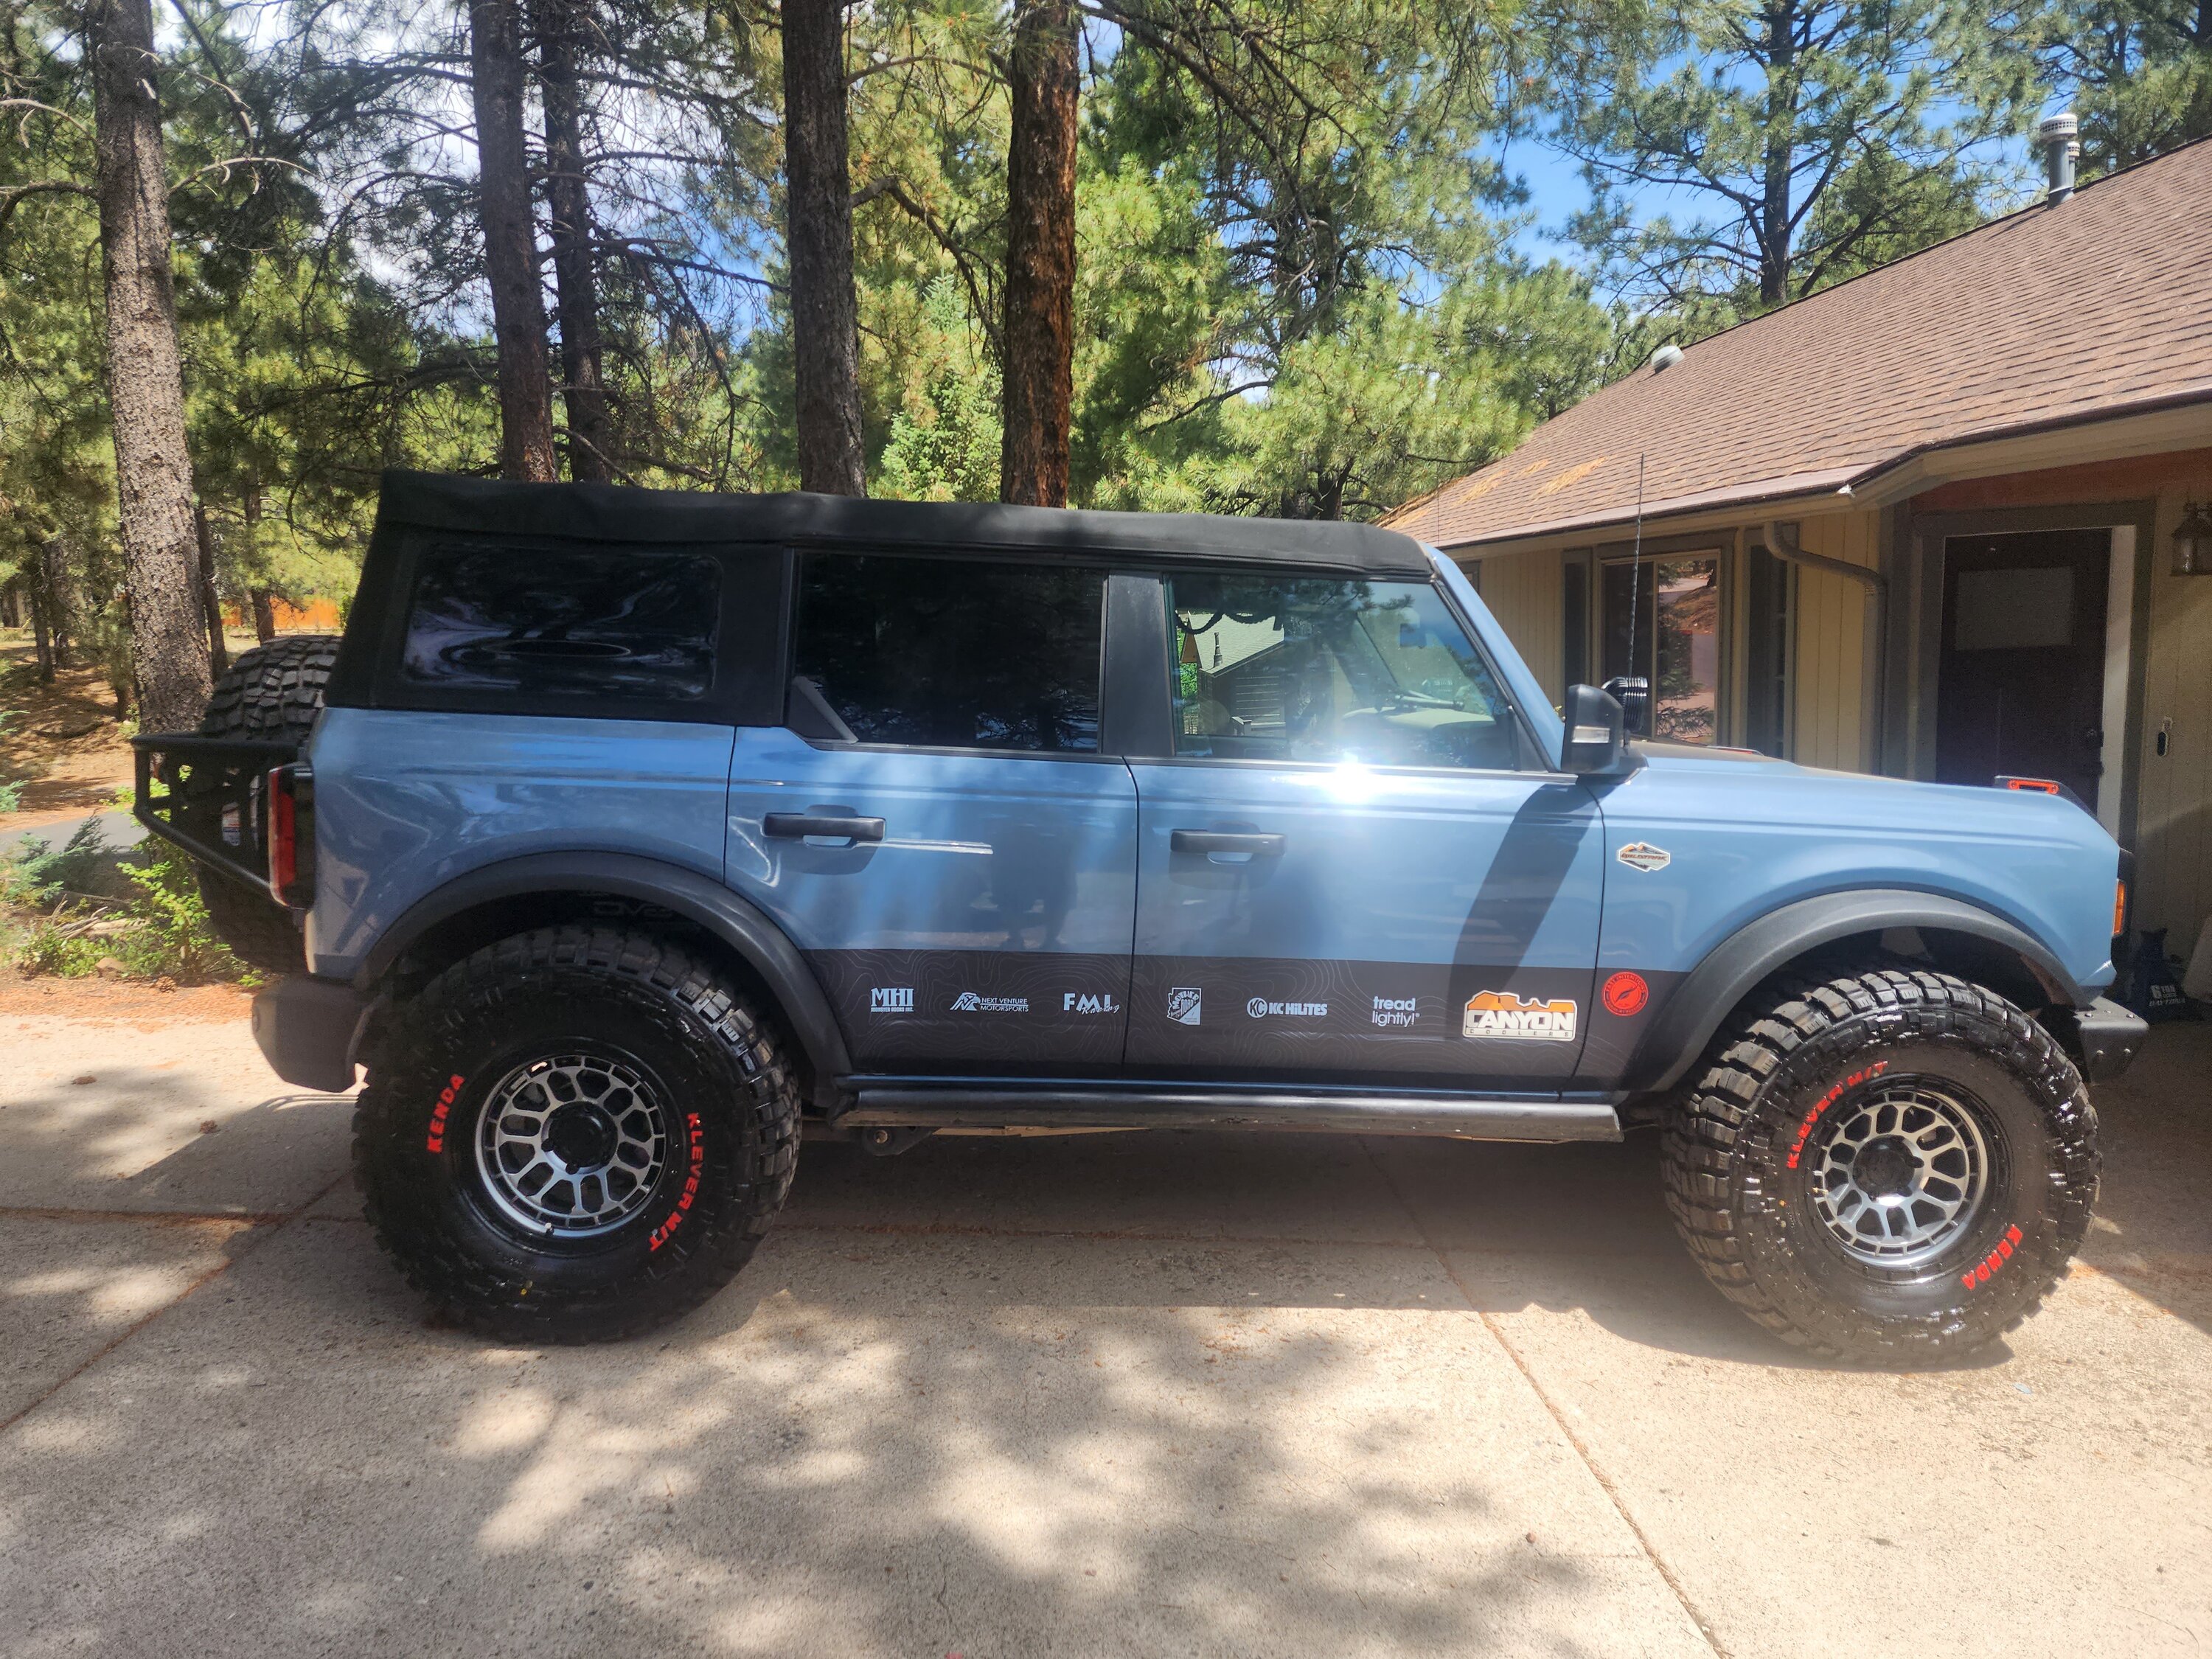 Ford Bronco Ceramic coating??  Any good?  Cost?  Opinions?? Etc 20230723_111013